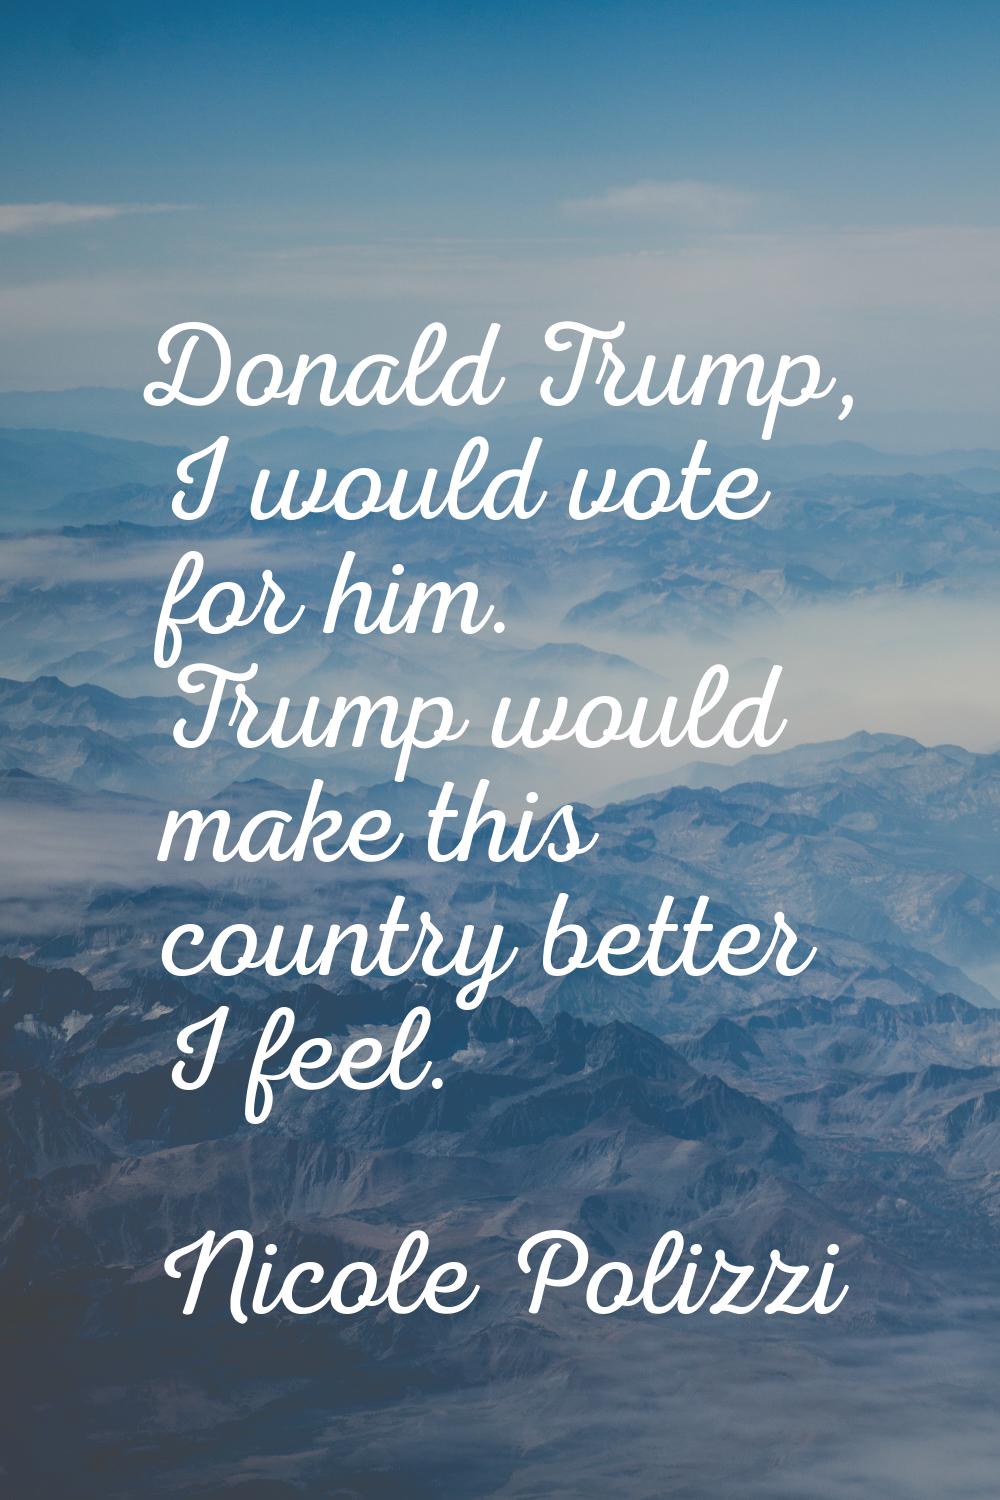 Donald Trump, I would vote for him. Trump would make this country better I feel.